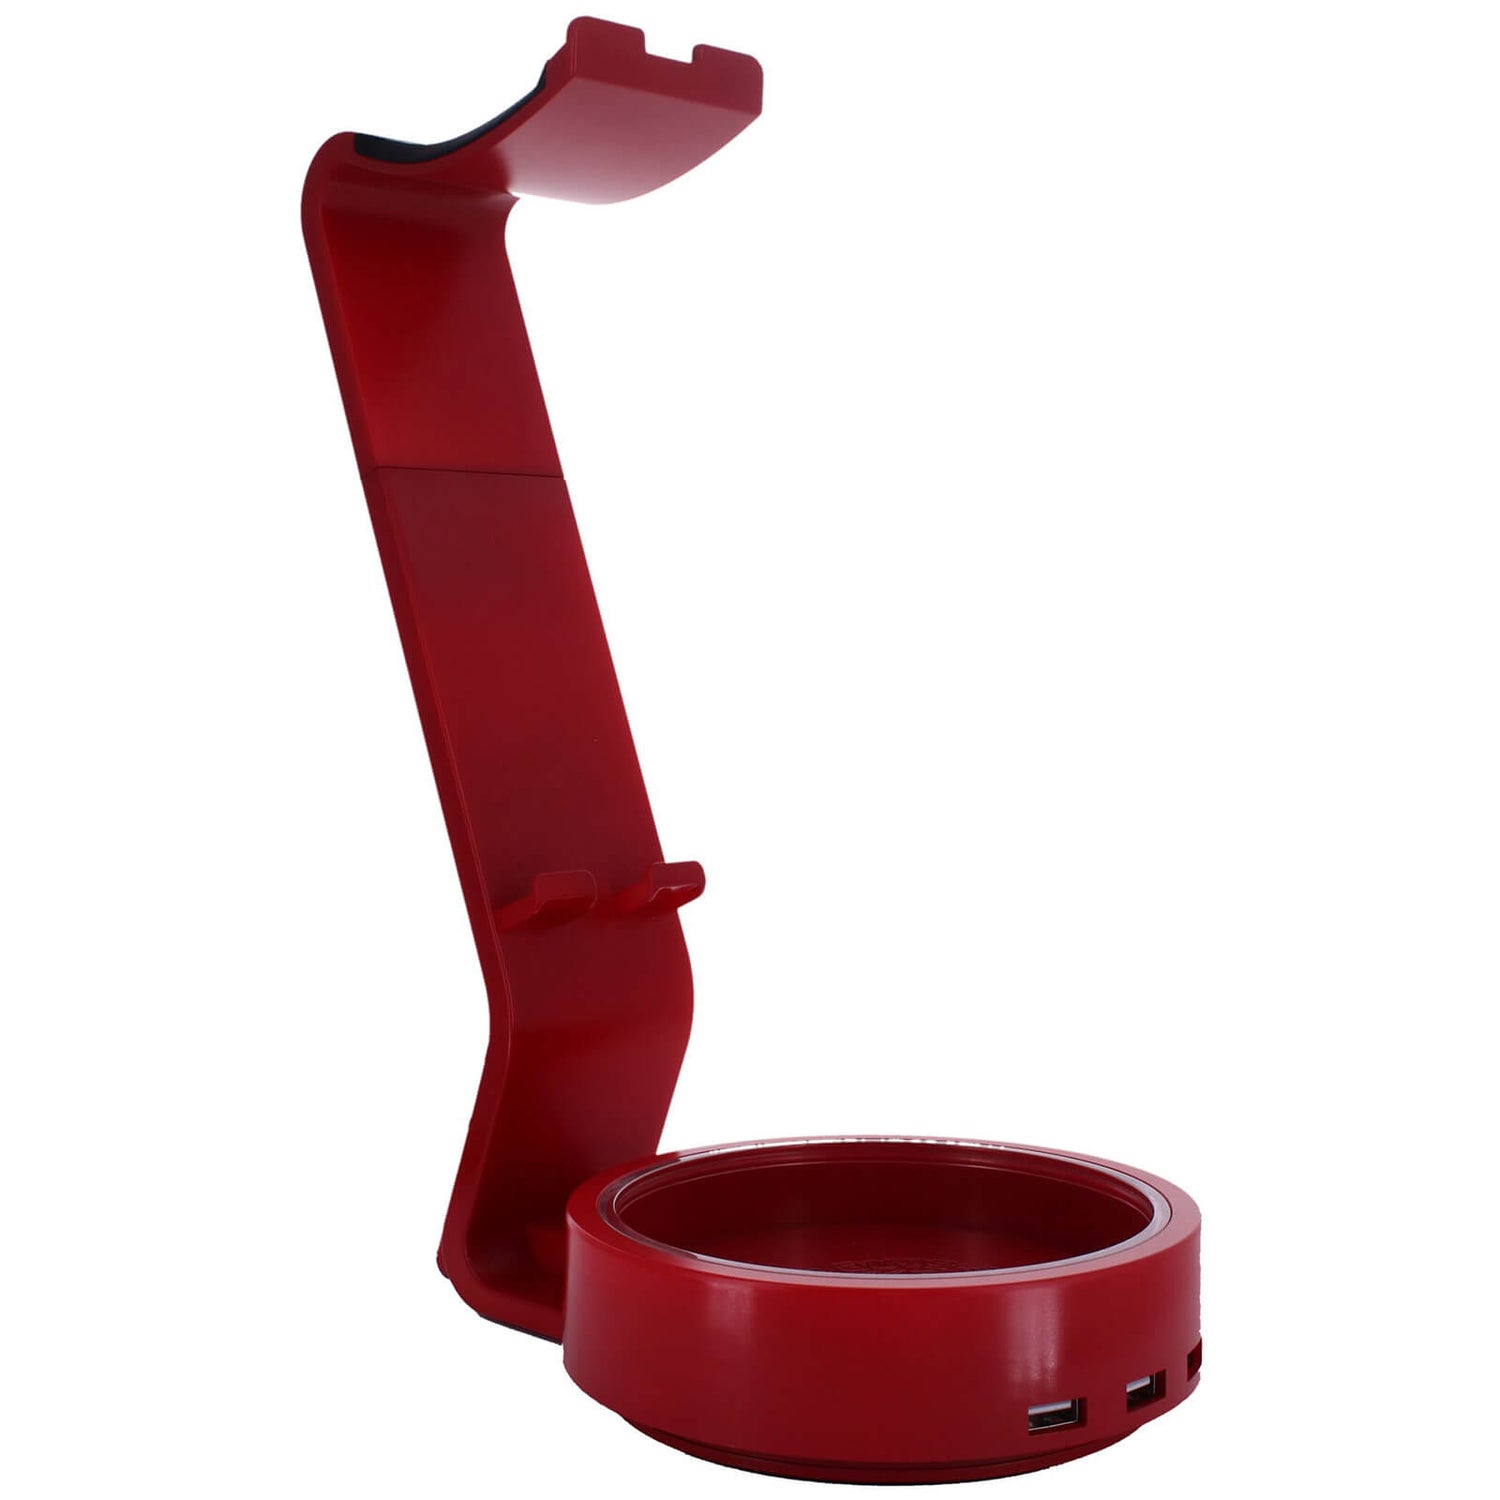 Cable Guys Powerstand Docking Station - Red